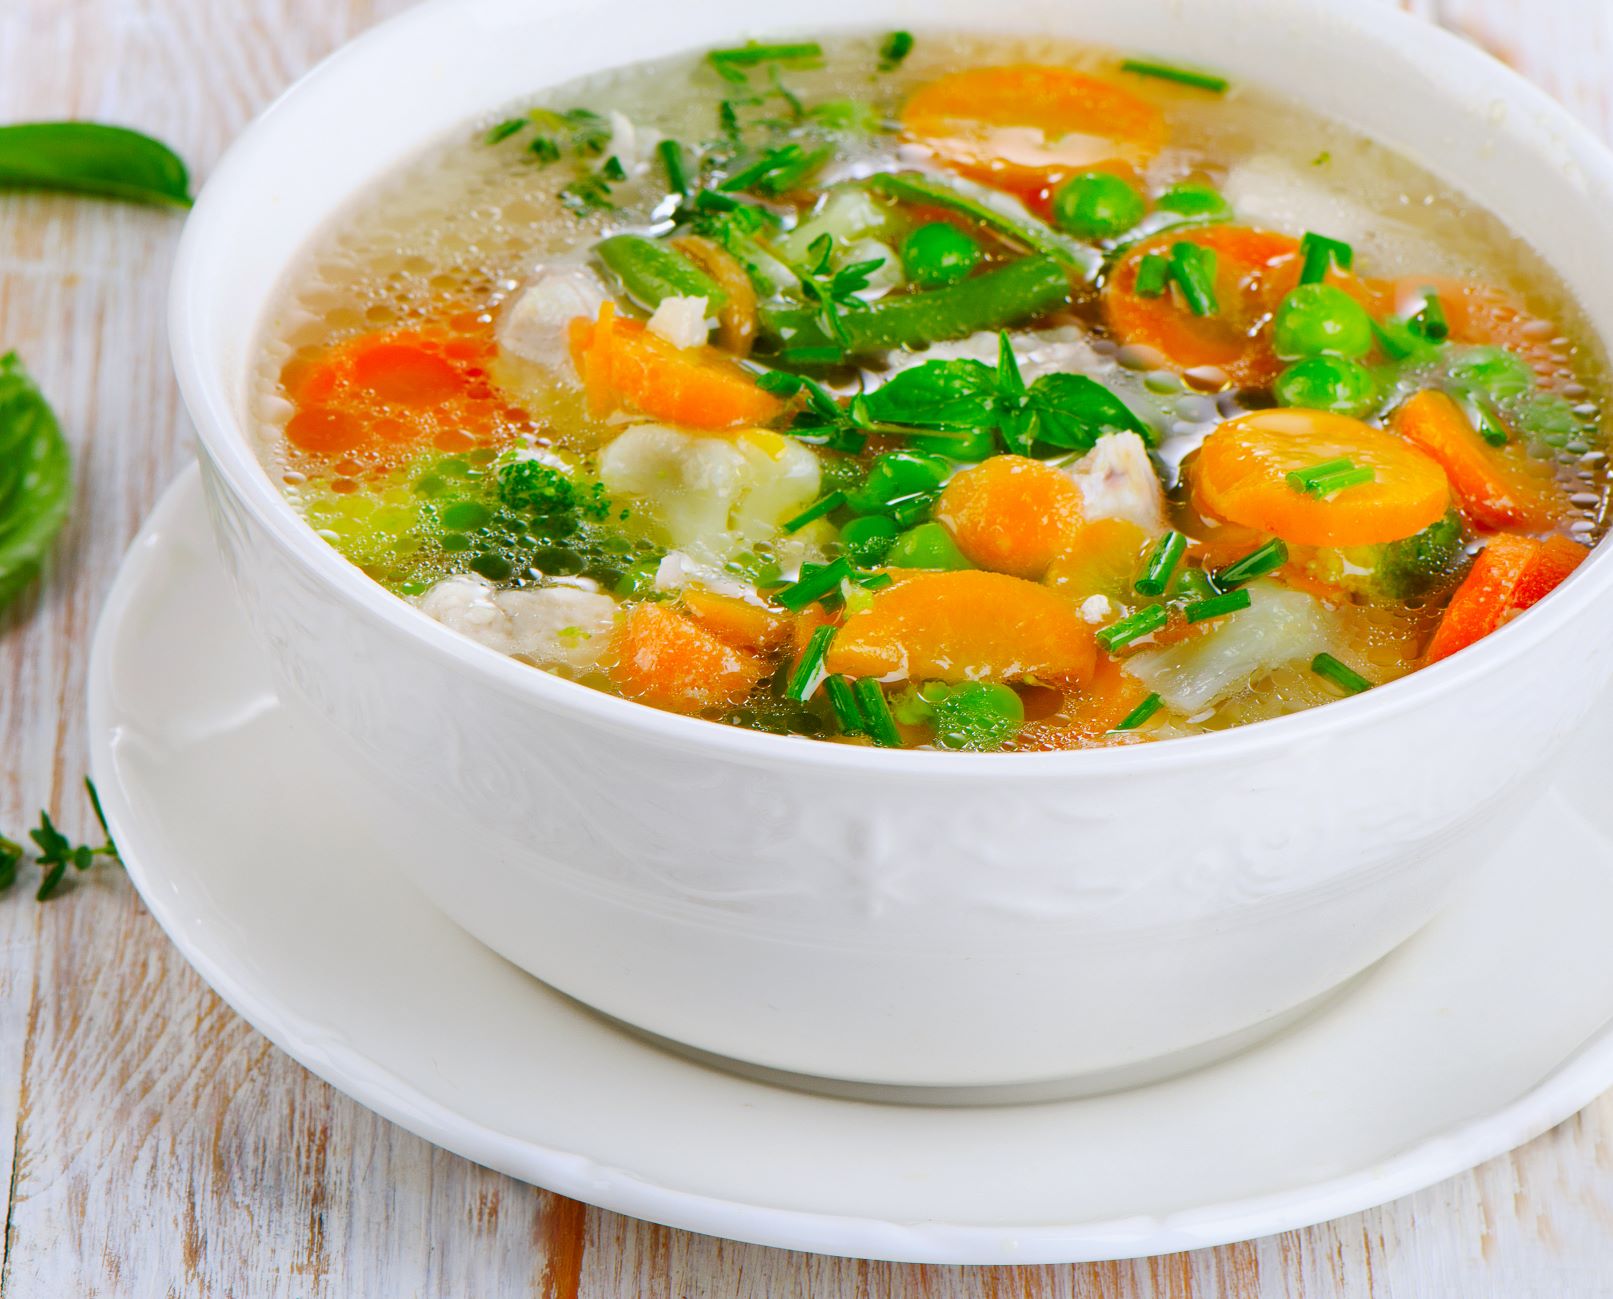 bowl of chicken and vegetable soup